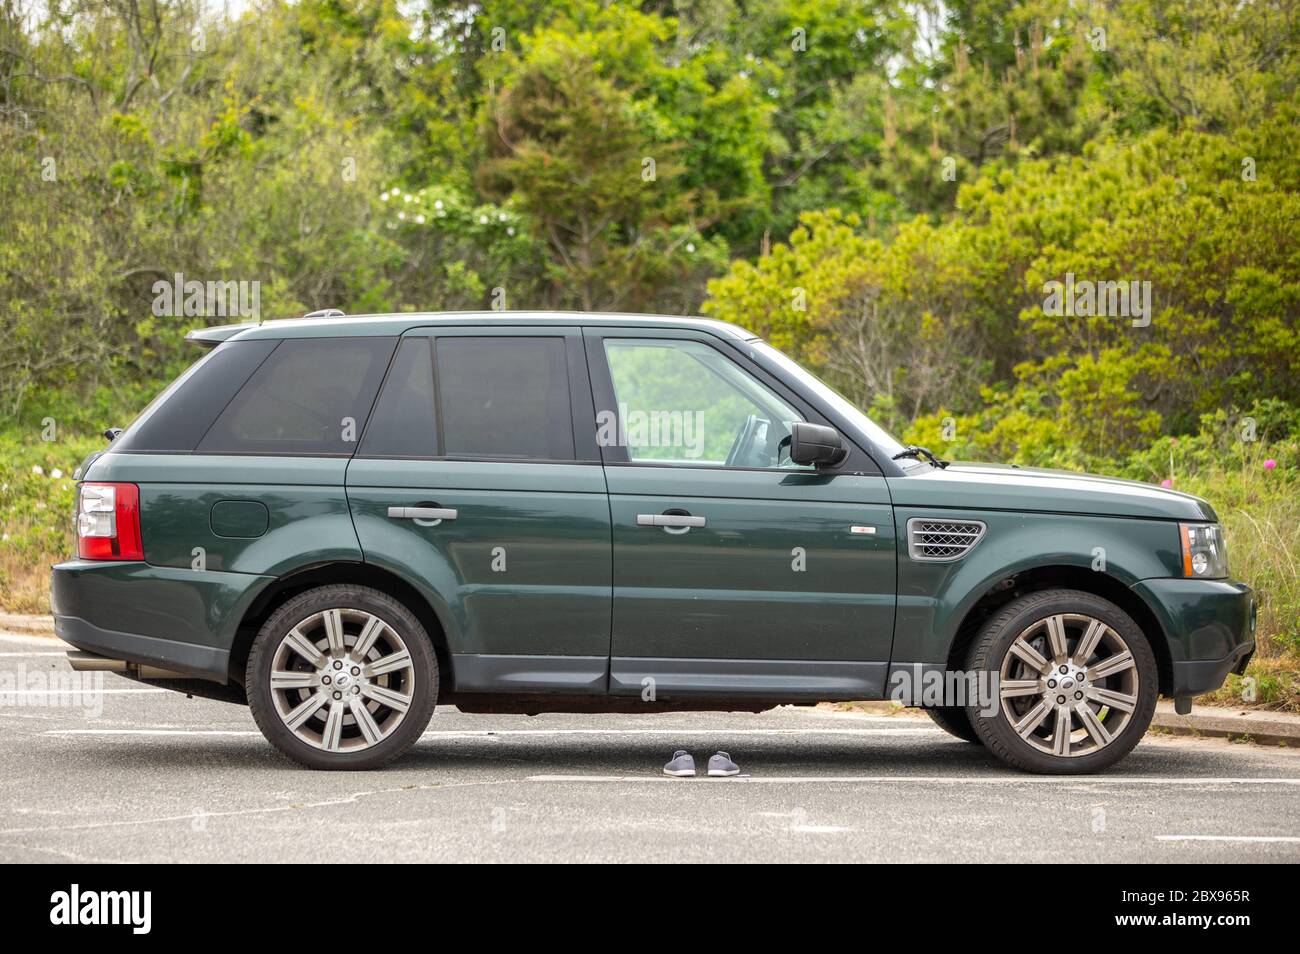 Green Range Rover at a Southampton beach with shoes sitting on the ground Stock Photo